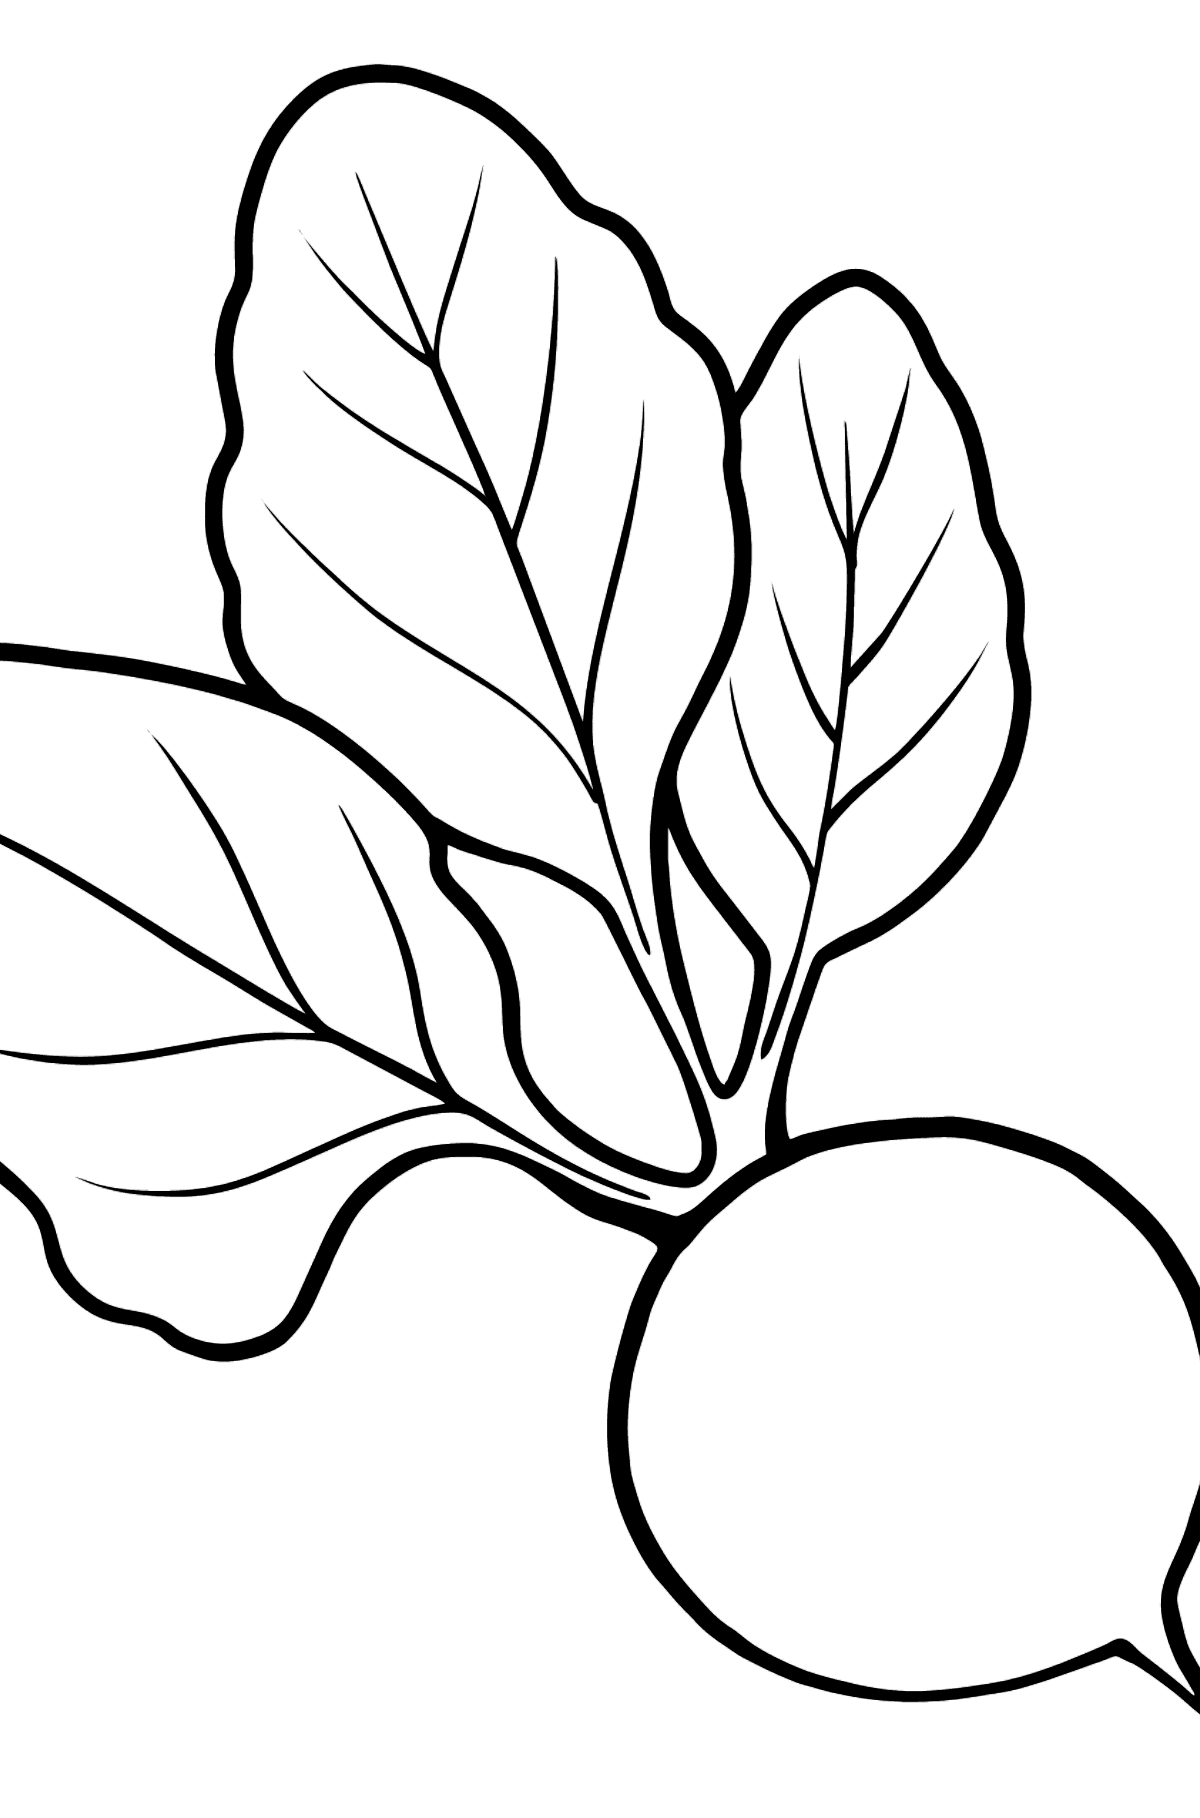 Beet coloring page - Coloring Pages for Kids